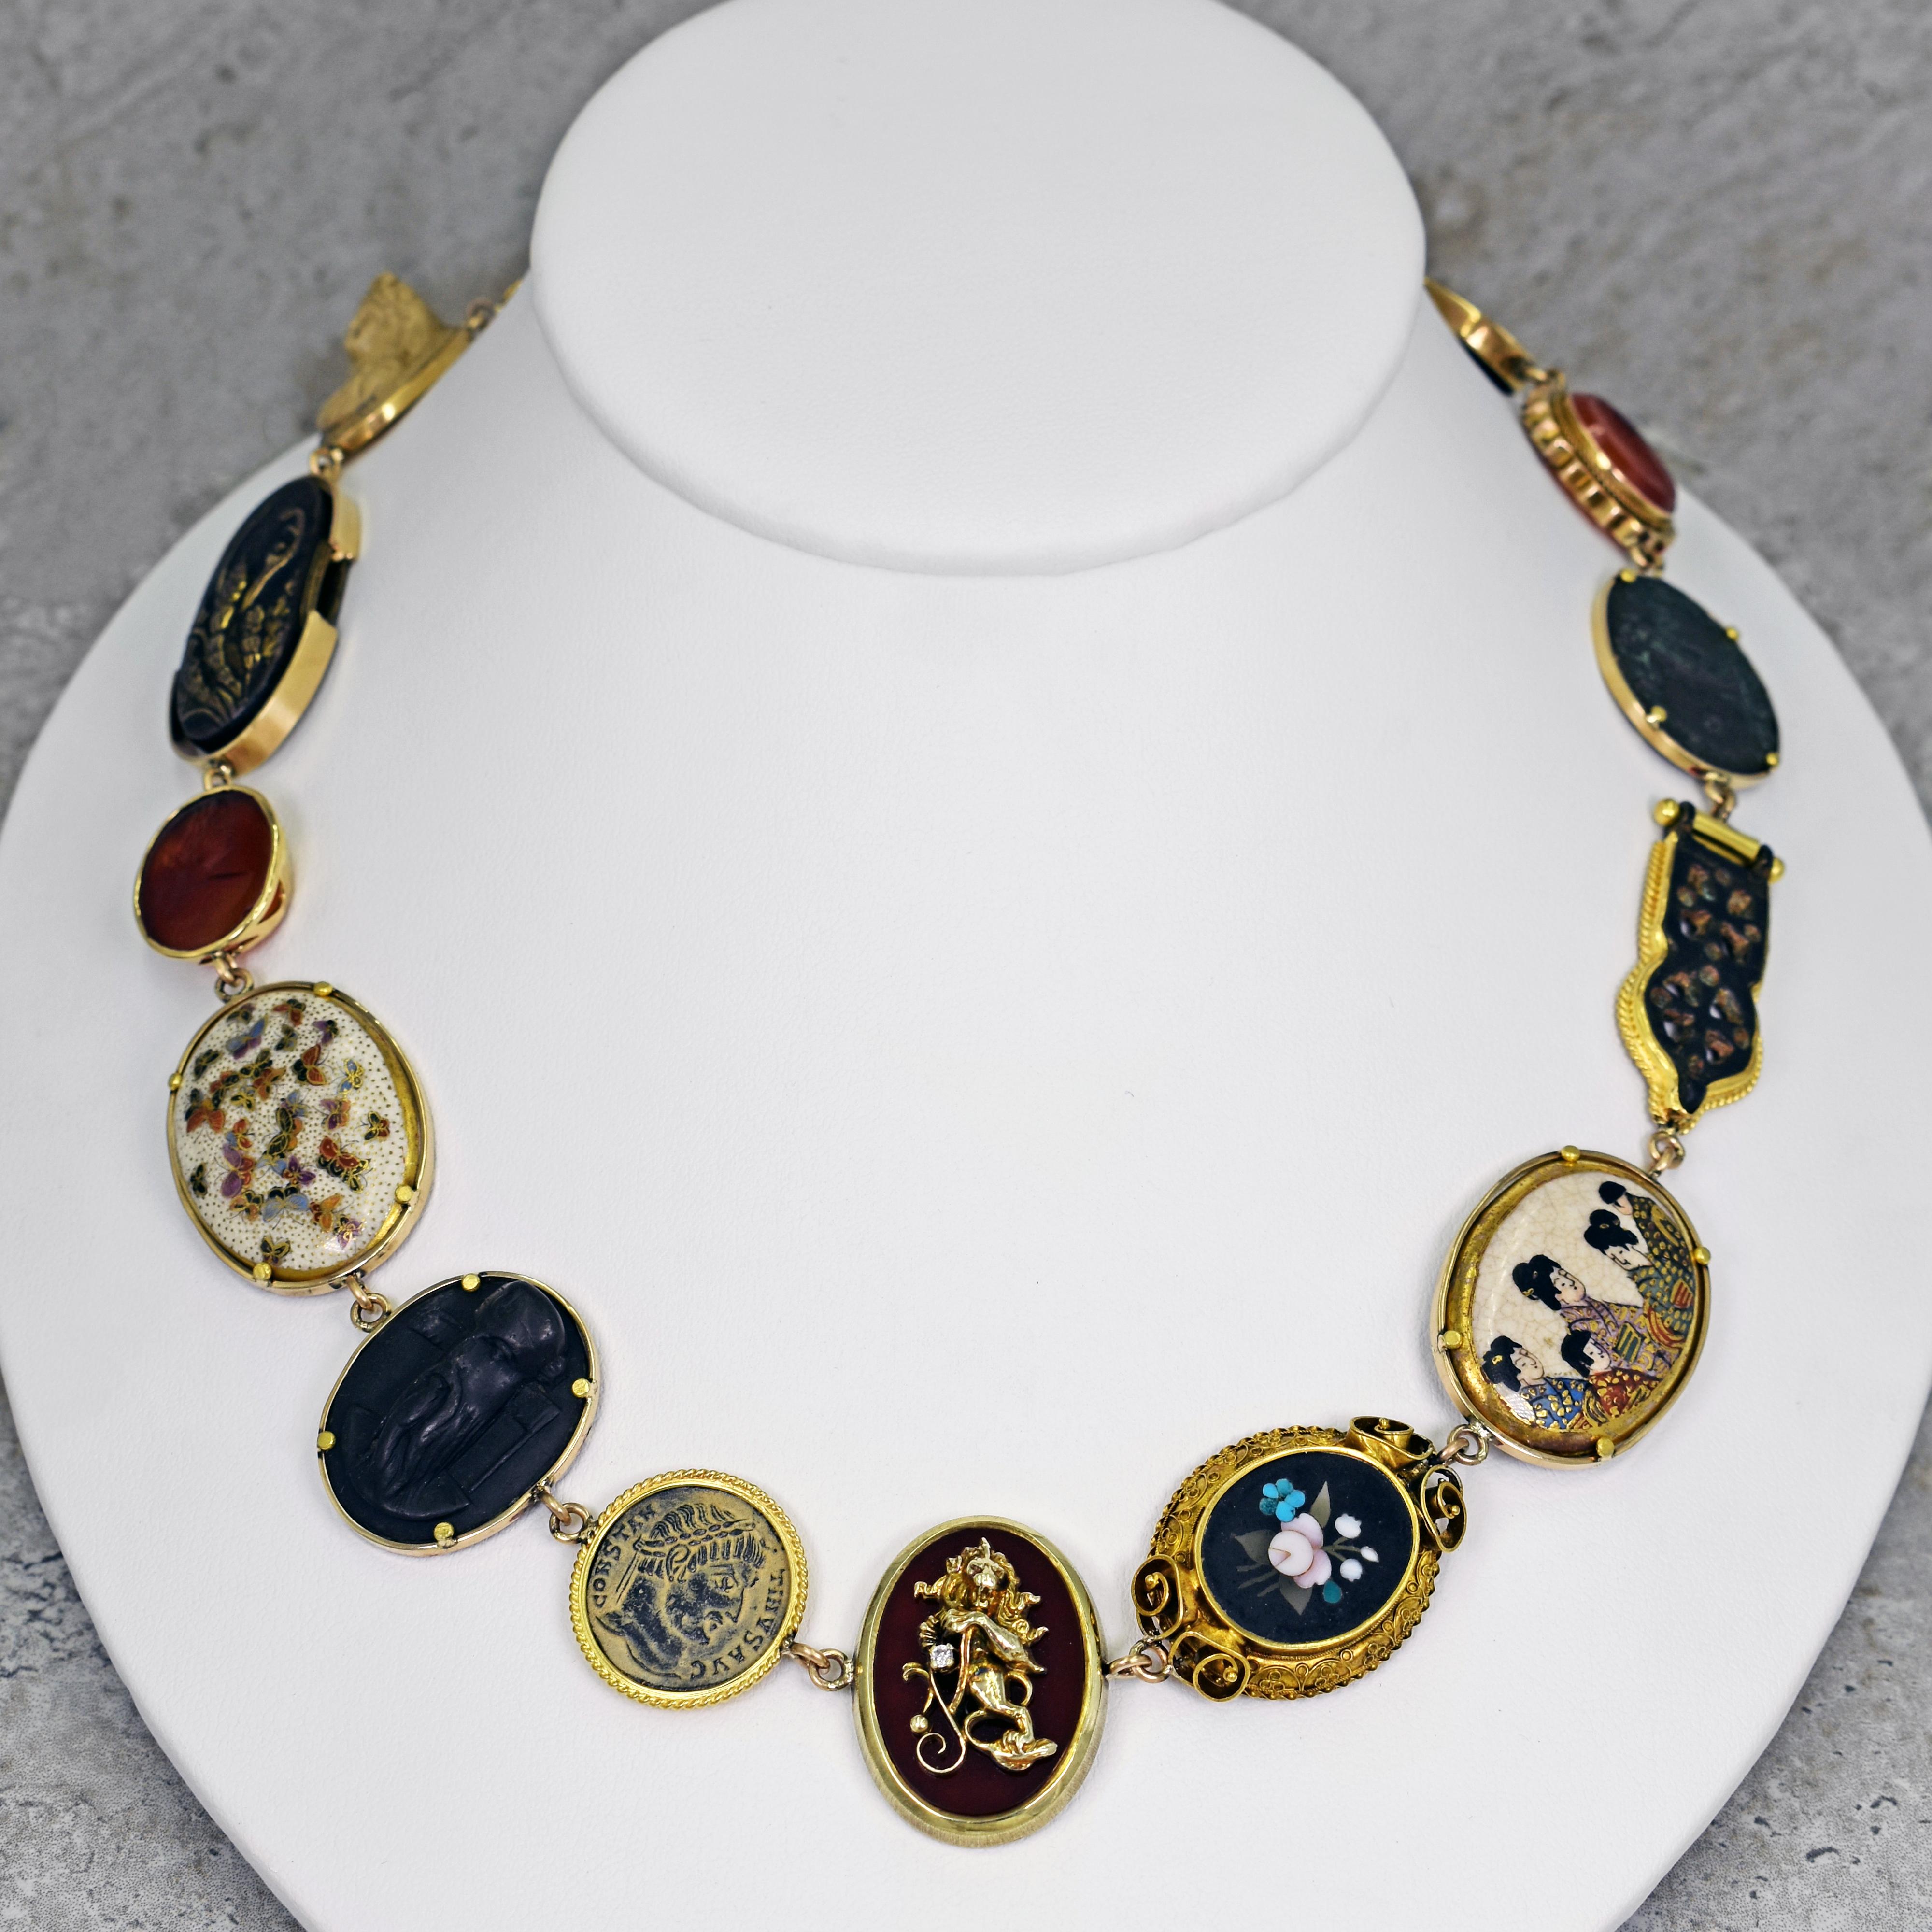 One-of-a-kind Vicki Orr 14k yellow gold Bohemian necklace with a variety of gemstones, vintage and antique jewelry components and an ancient coin. Necklace has 15 unique pieces, featuring Byzantine-era Bronze Roman Cross, Bone Cameo, Antique Samurai